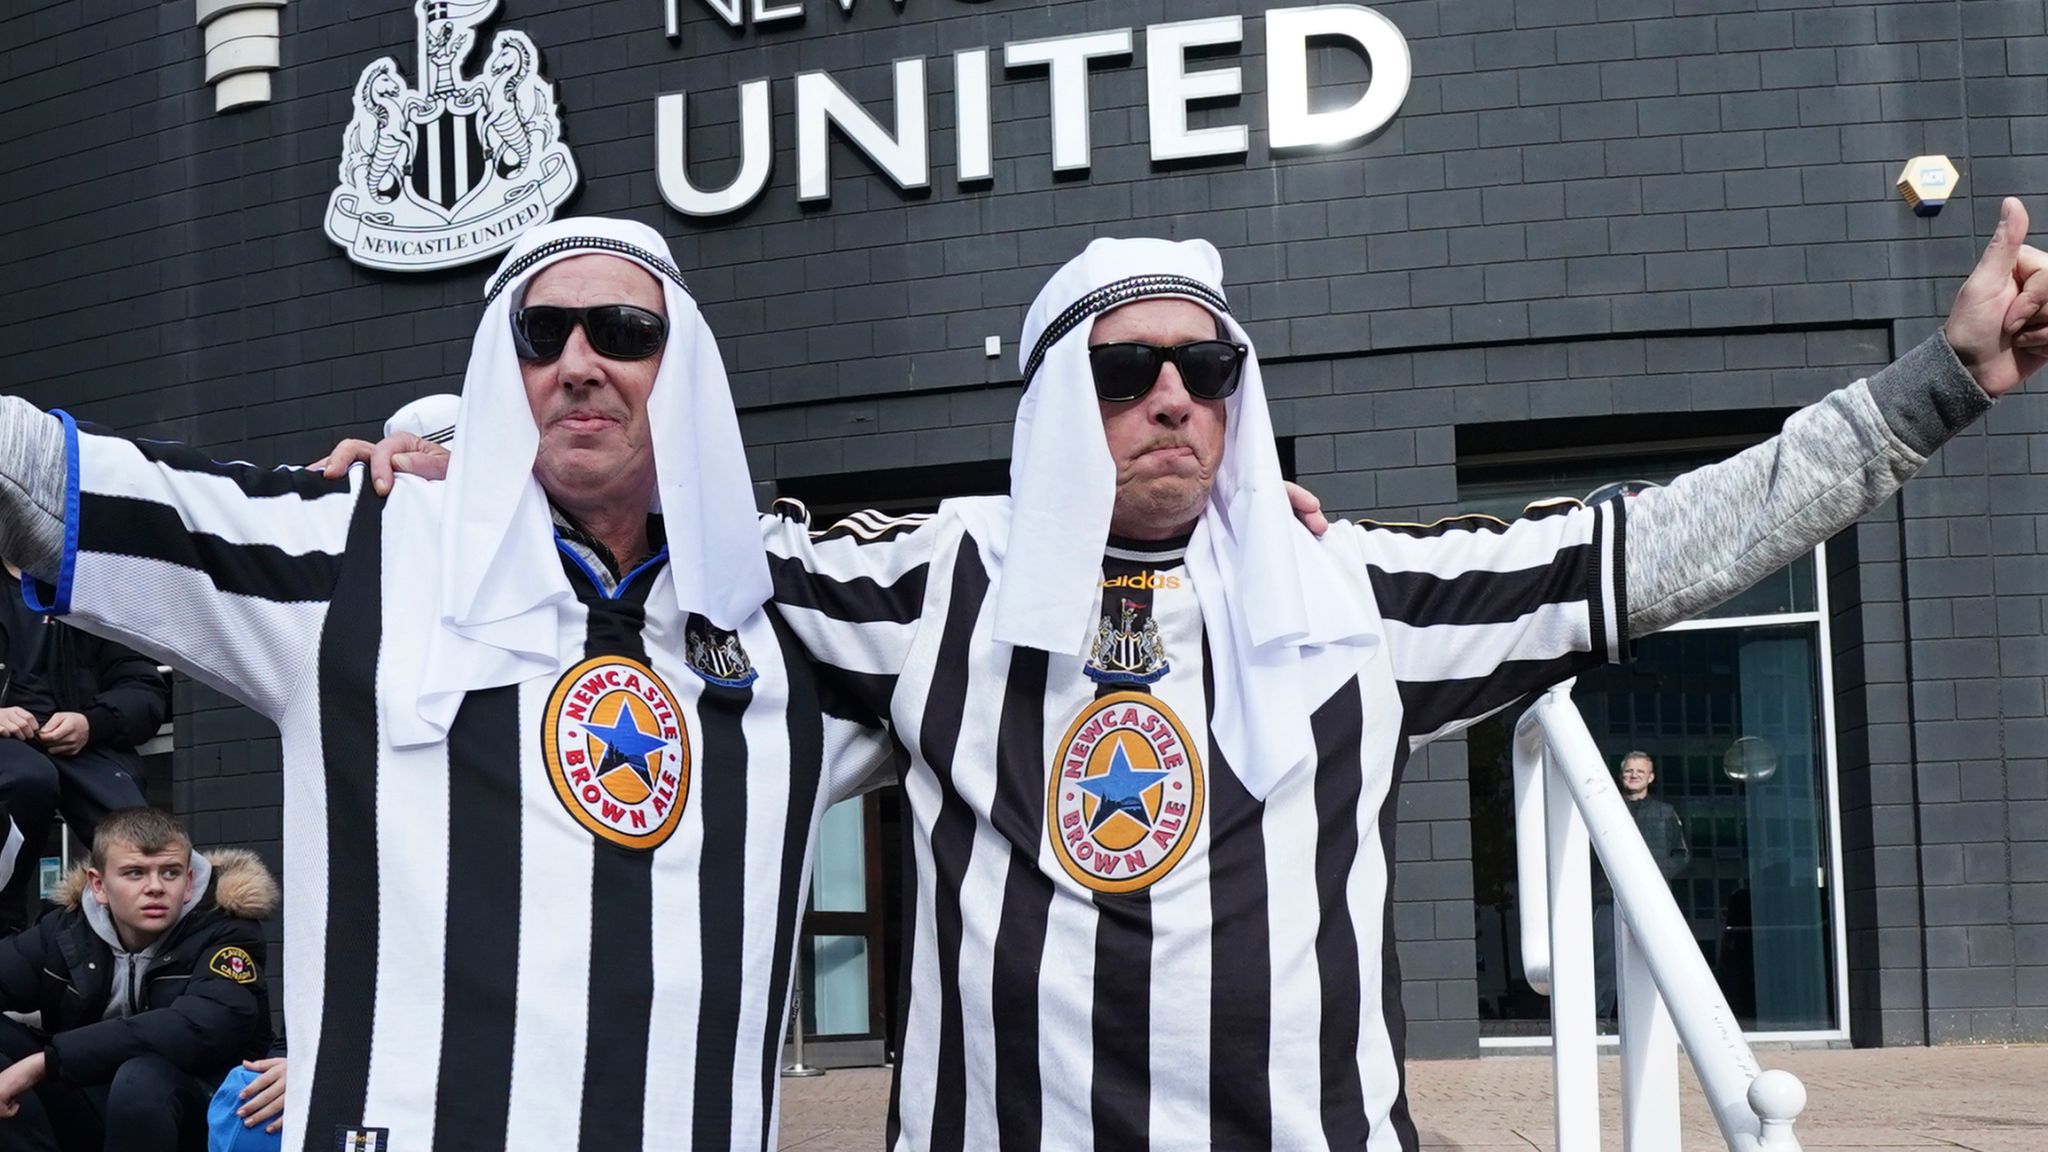 Newcastle ask fans to not wear Arab-style clothing to matches